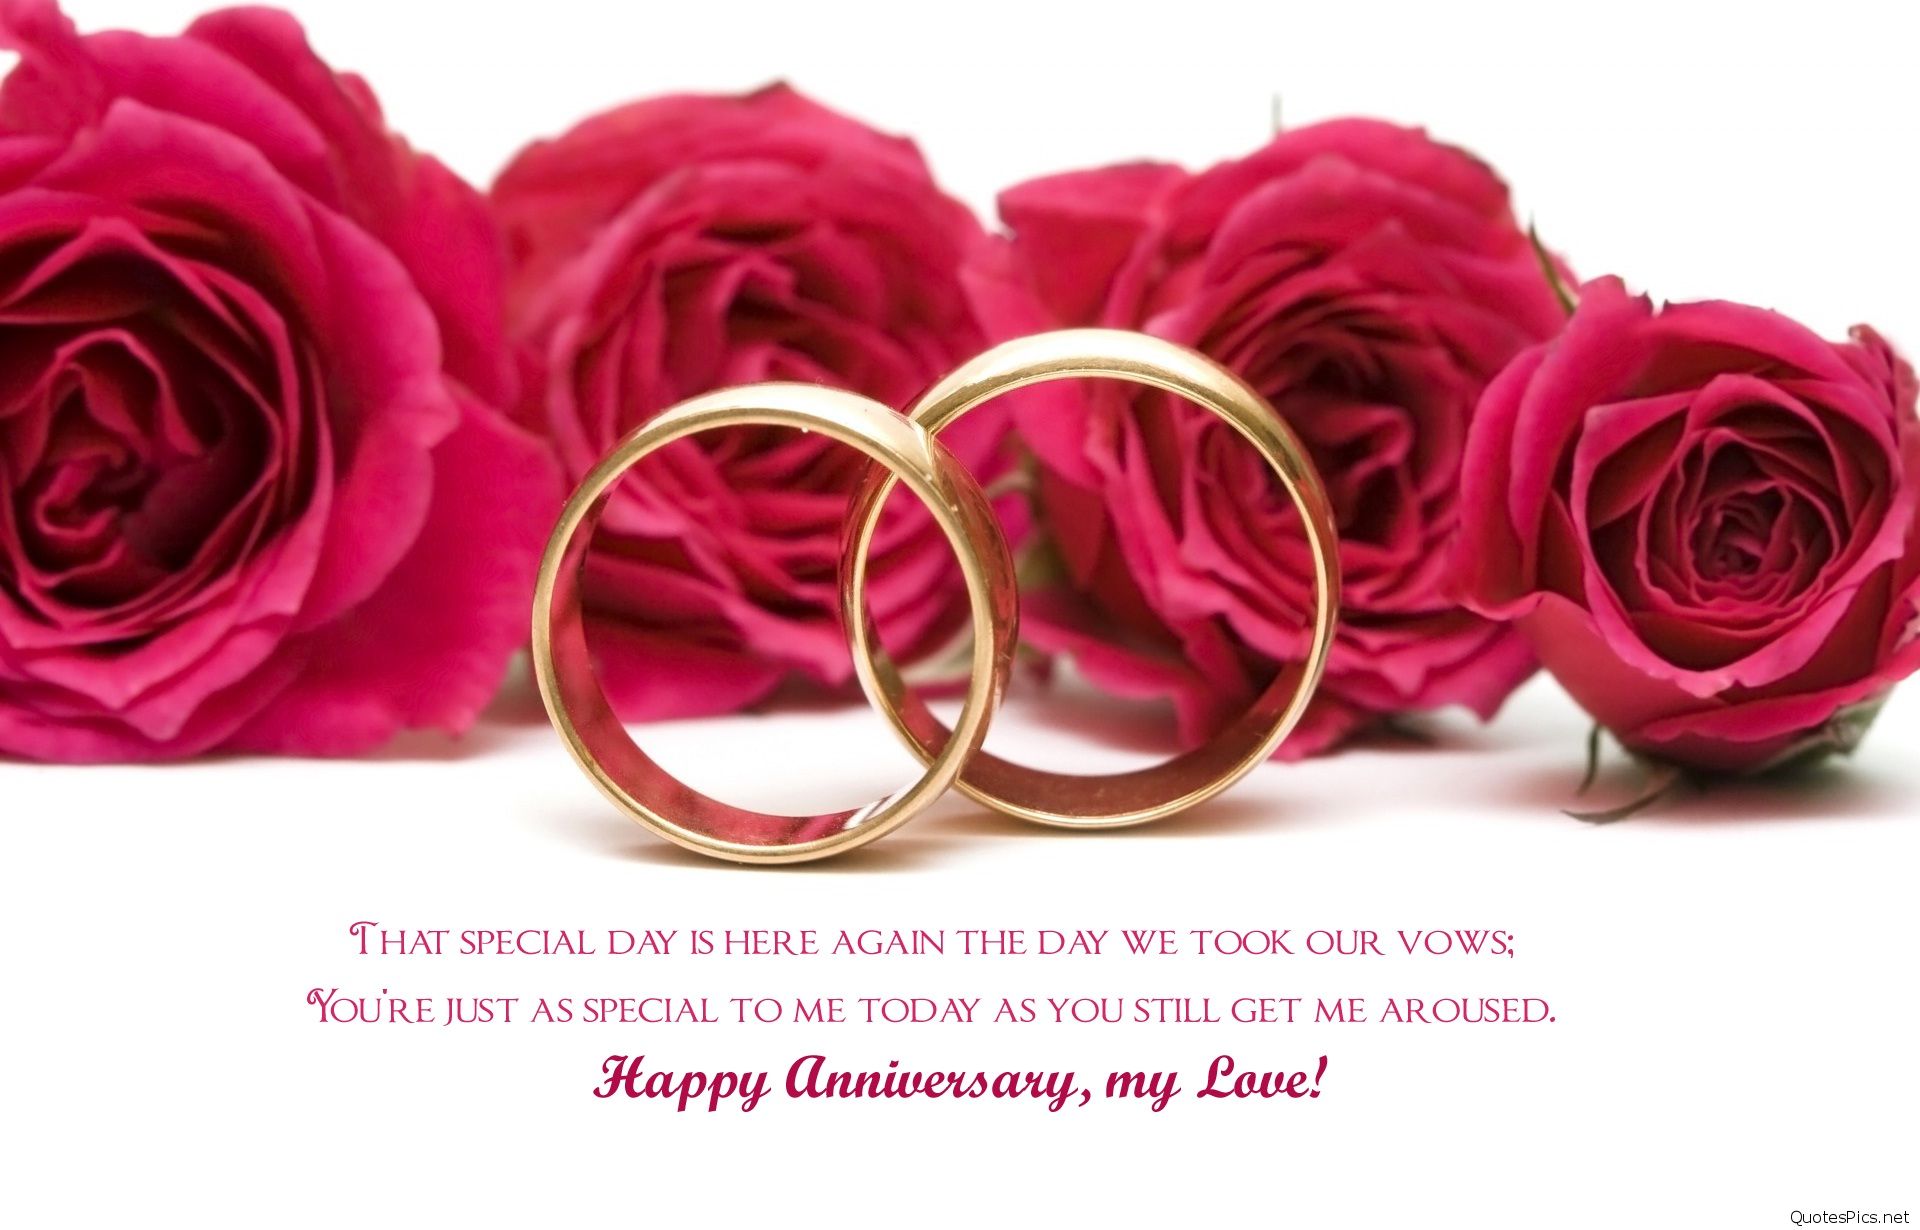 happy anniversary wallpaper,pink,garden roses,text,rose,red